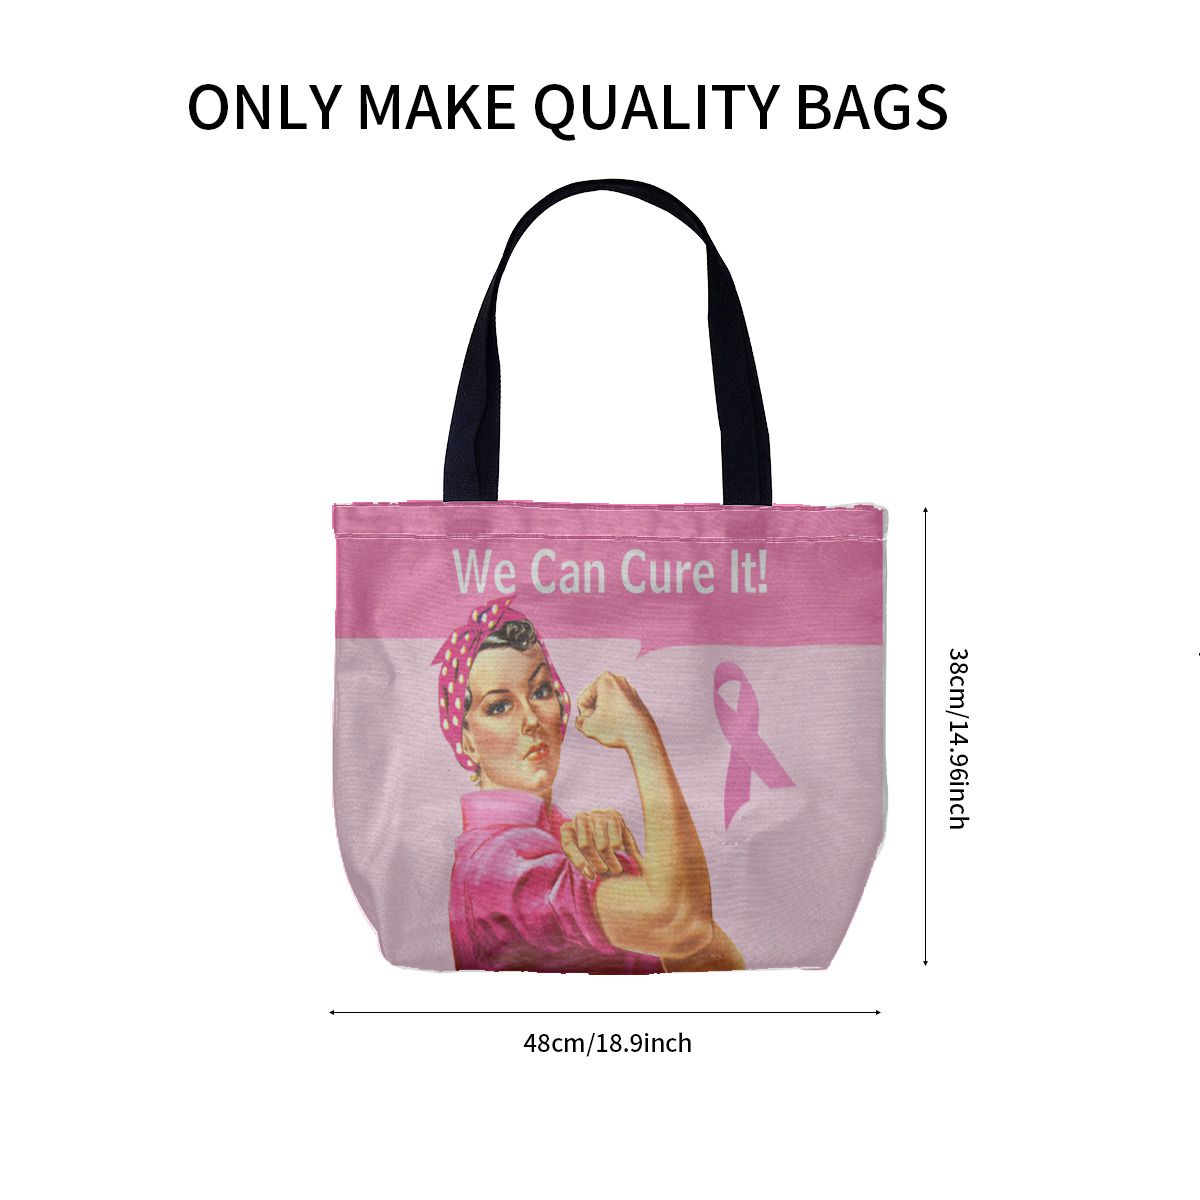 Breast Cancer Awareness Rosie the Riveter Canvas Bag No.QHLOCQ